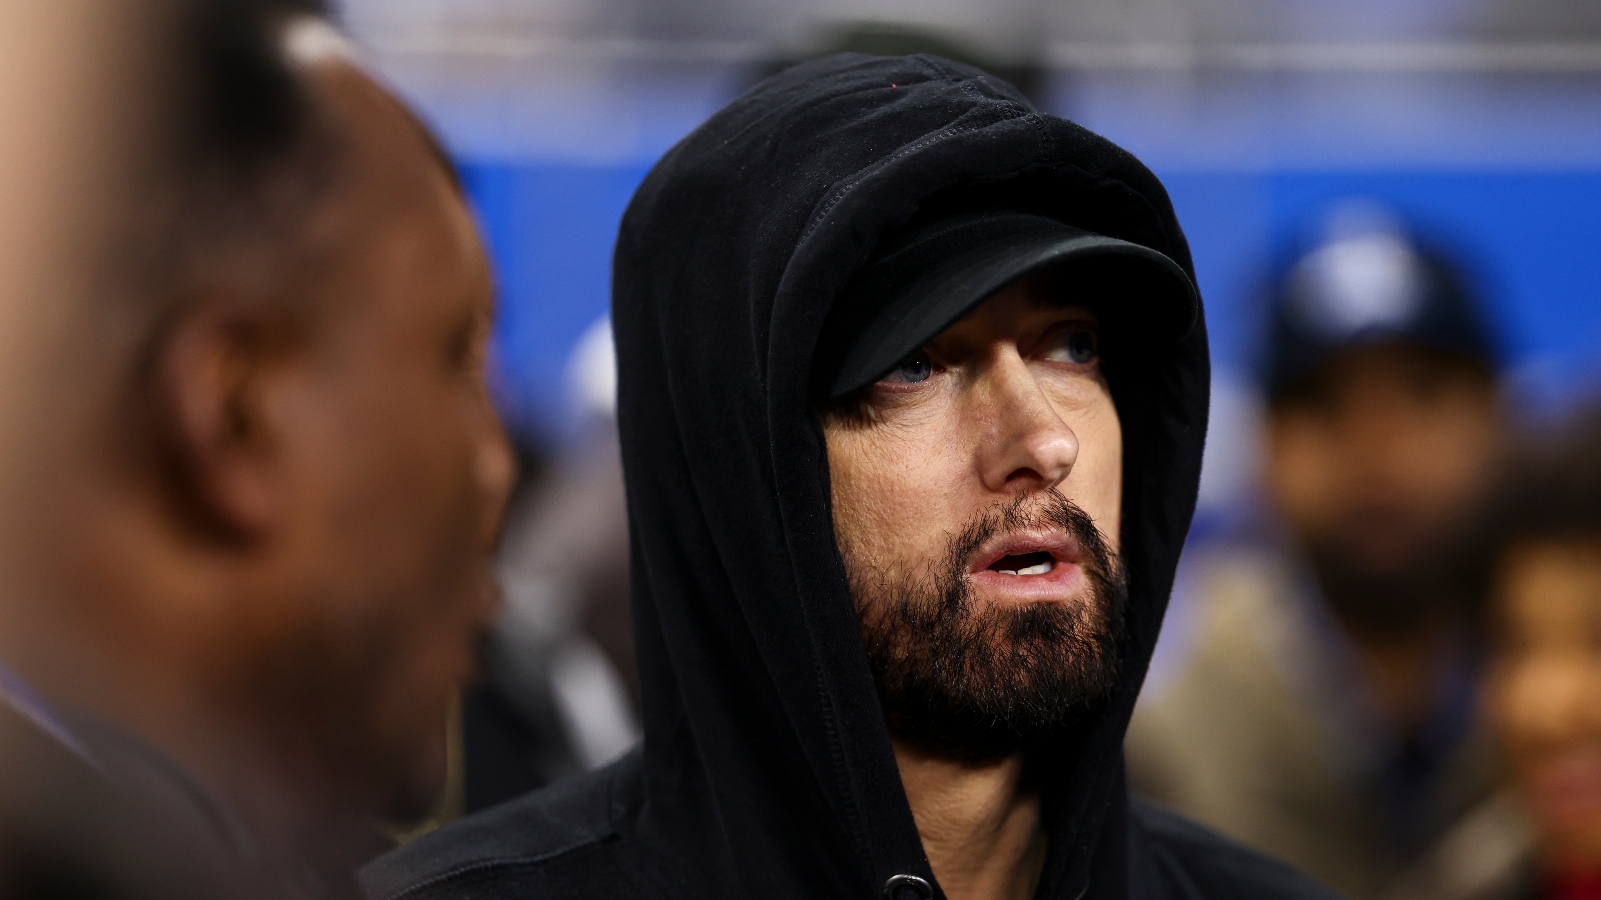 Eminem Celebrates 16 Years Of Sobriety And Receives An Outpouring Of Support #Eminem